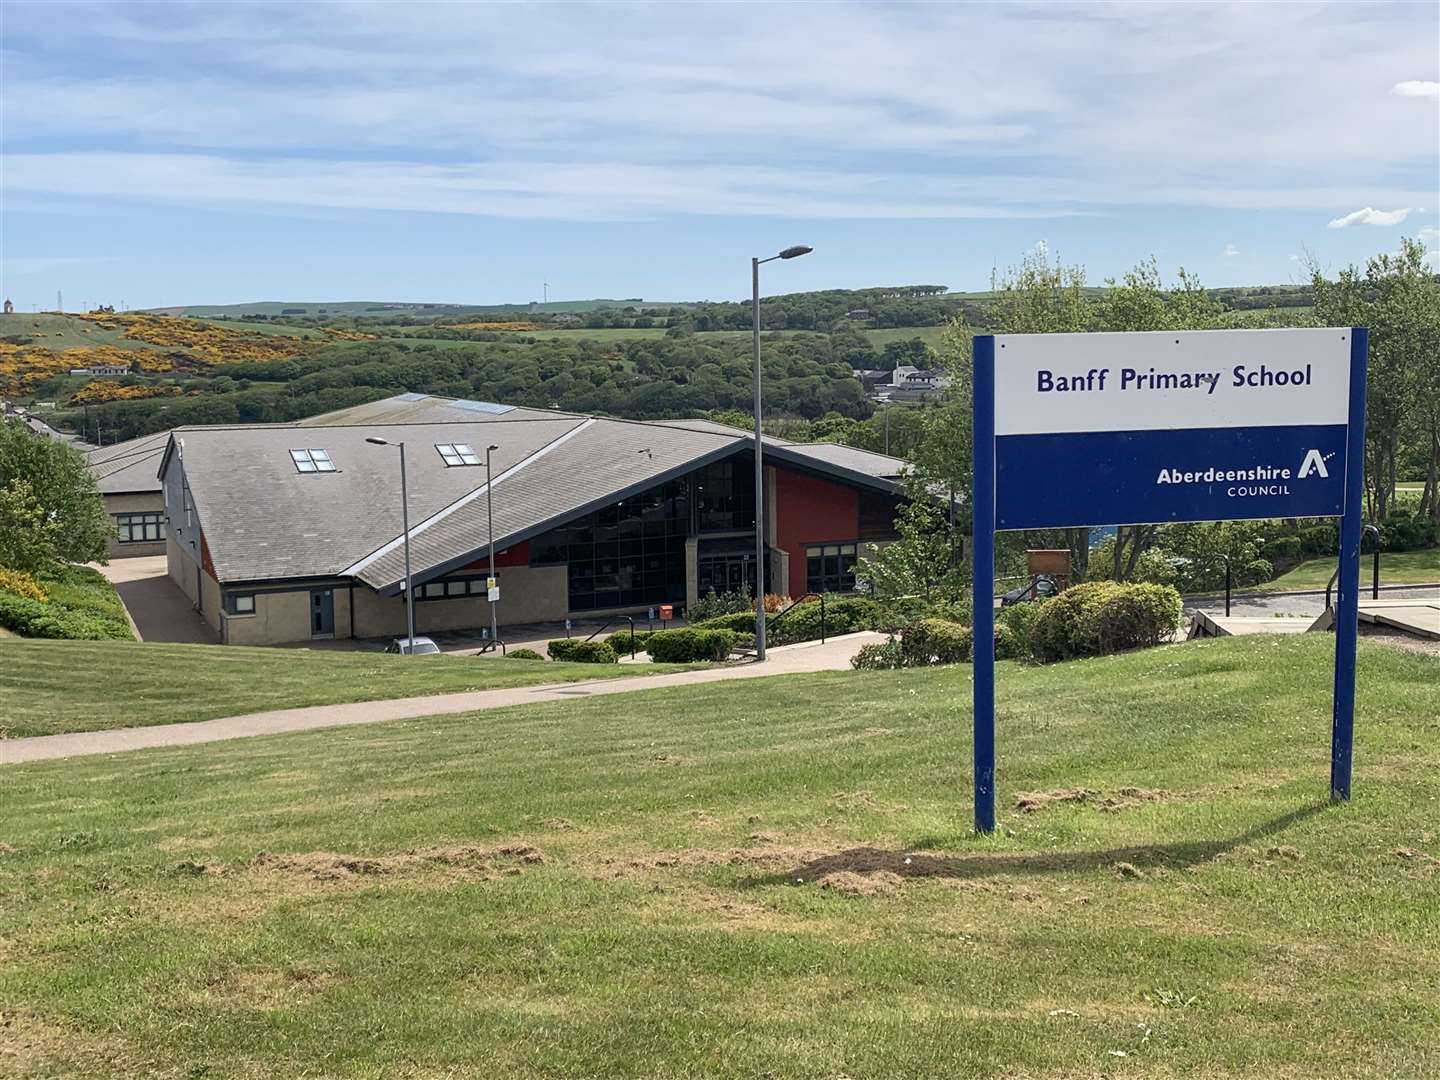 Plans to replace the roof at Banff Primary School have been approved.